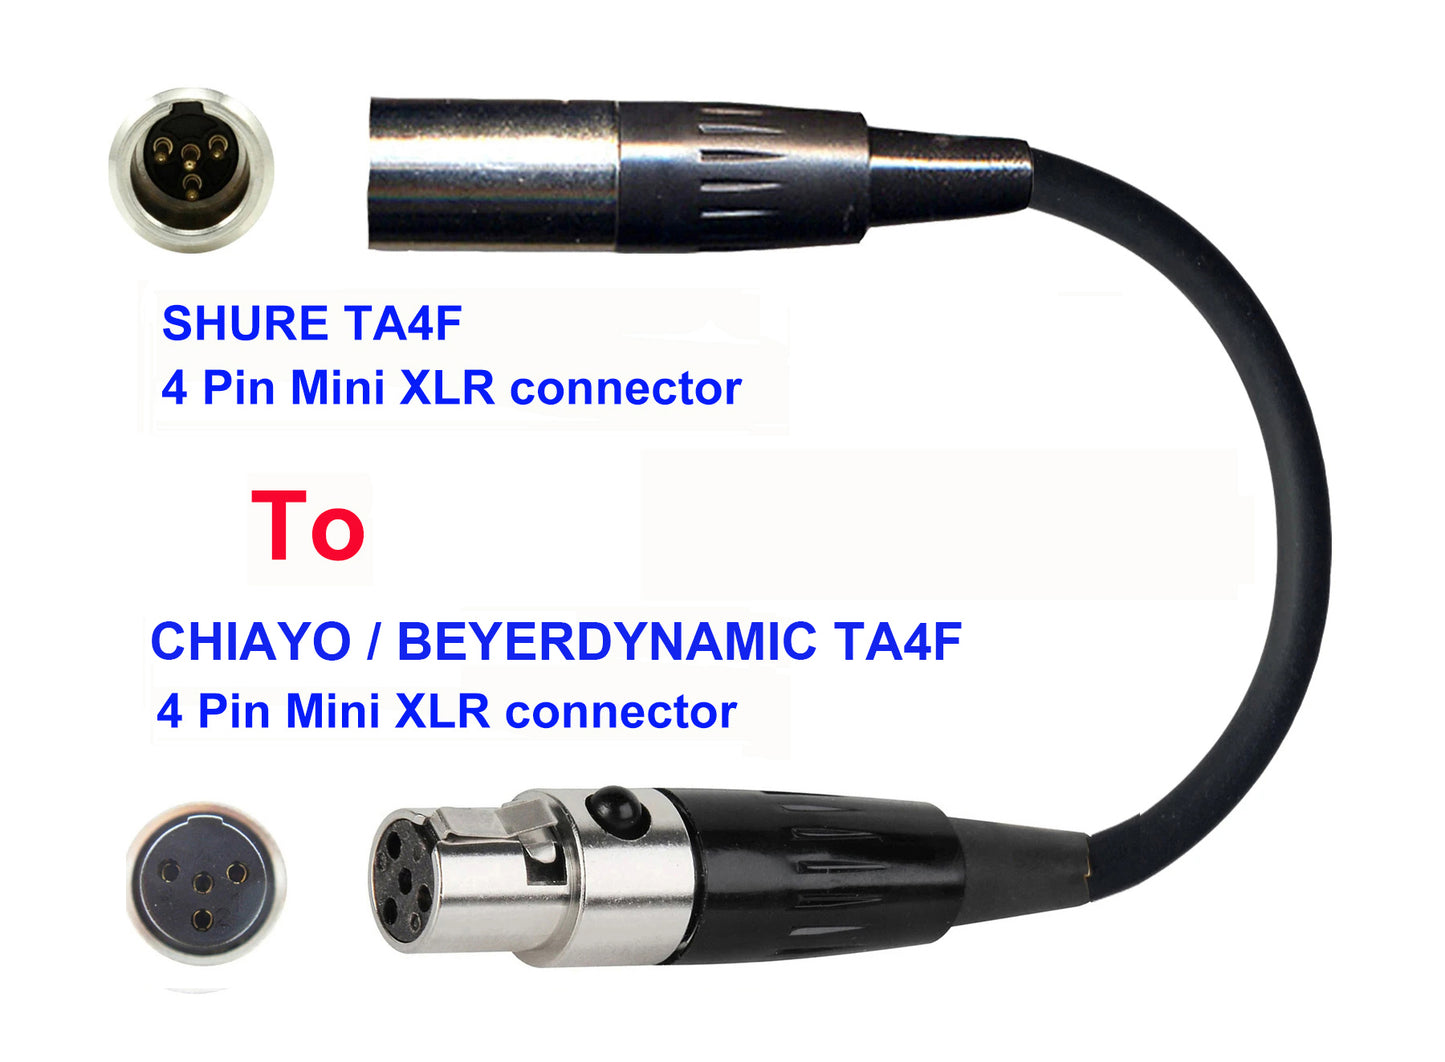 Microphone Adapter - Shure Microphones with TA4F 4 pin mini XLR connector TO Chiayo / JTS / Line6 / Beyerdynamic Transmitters with 4 pin TA4M connector